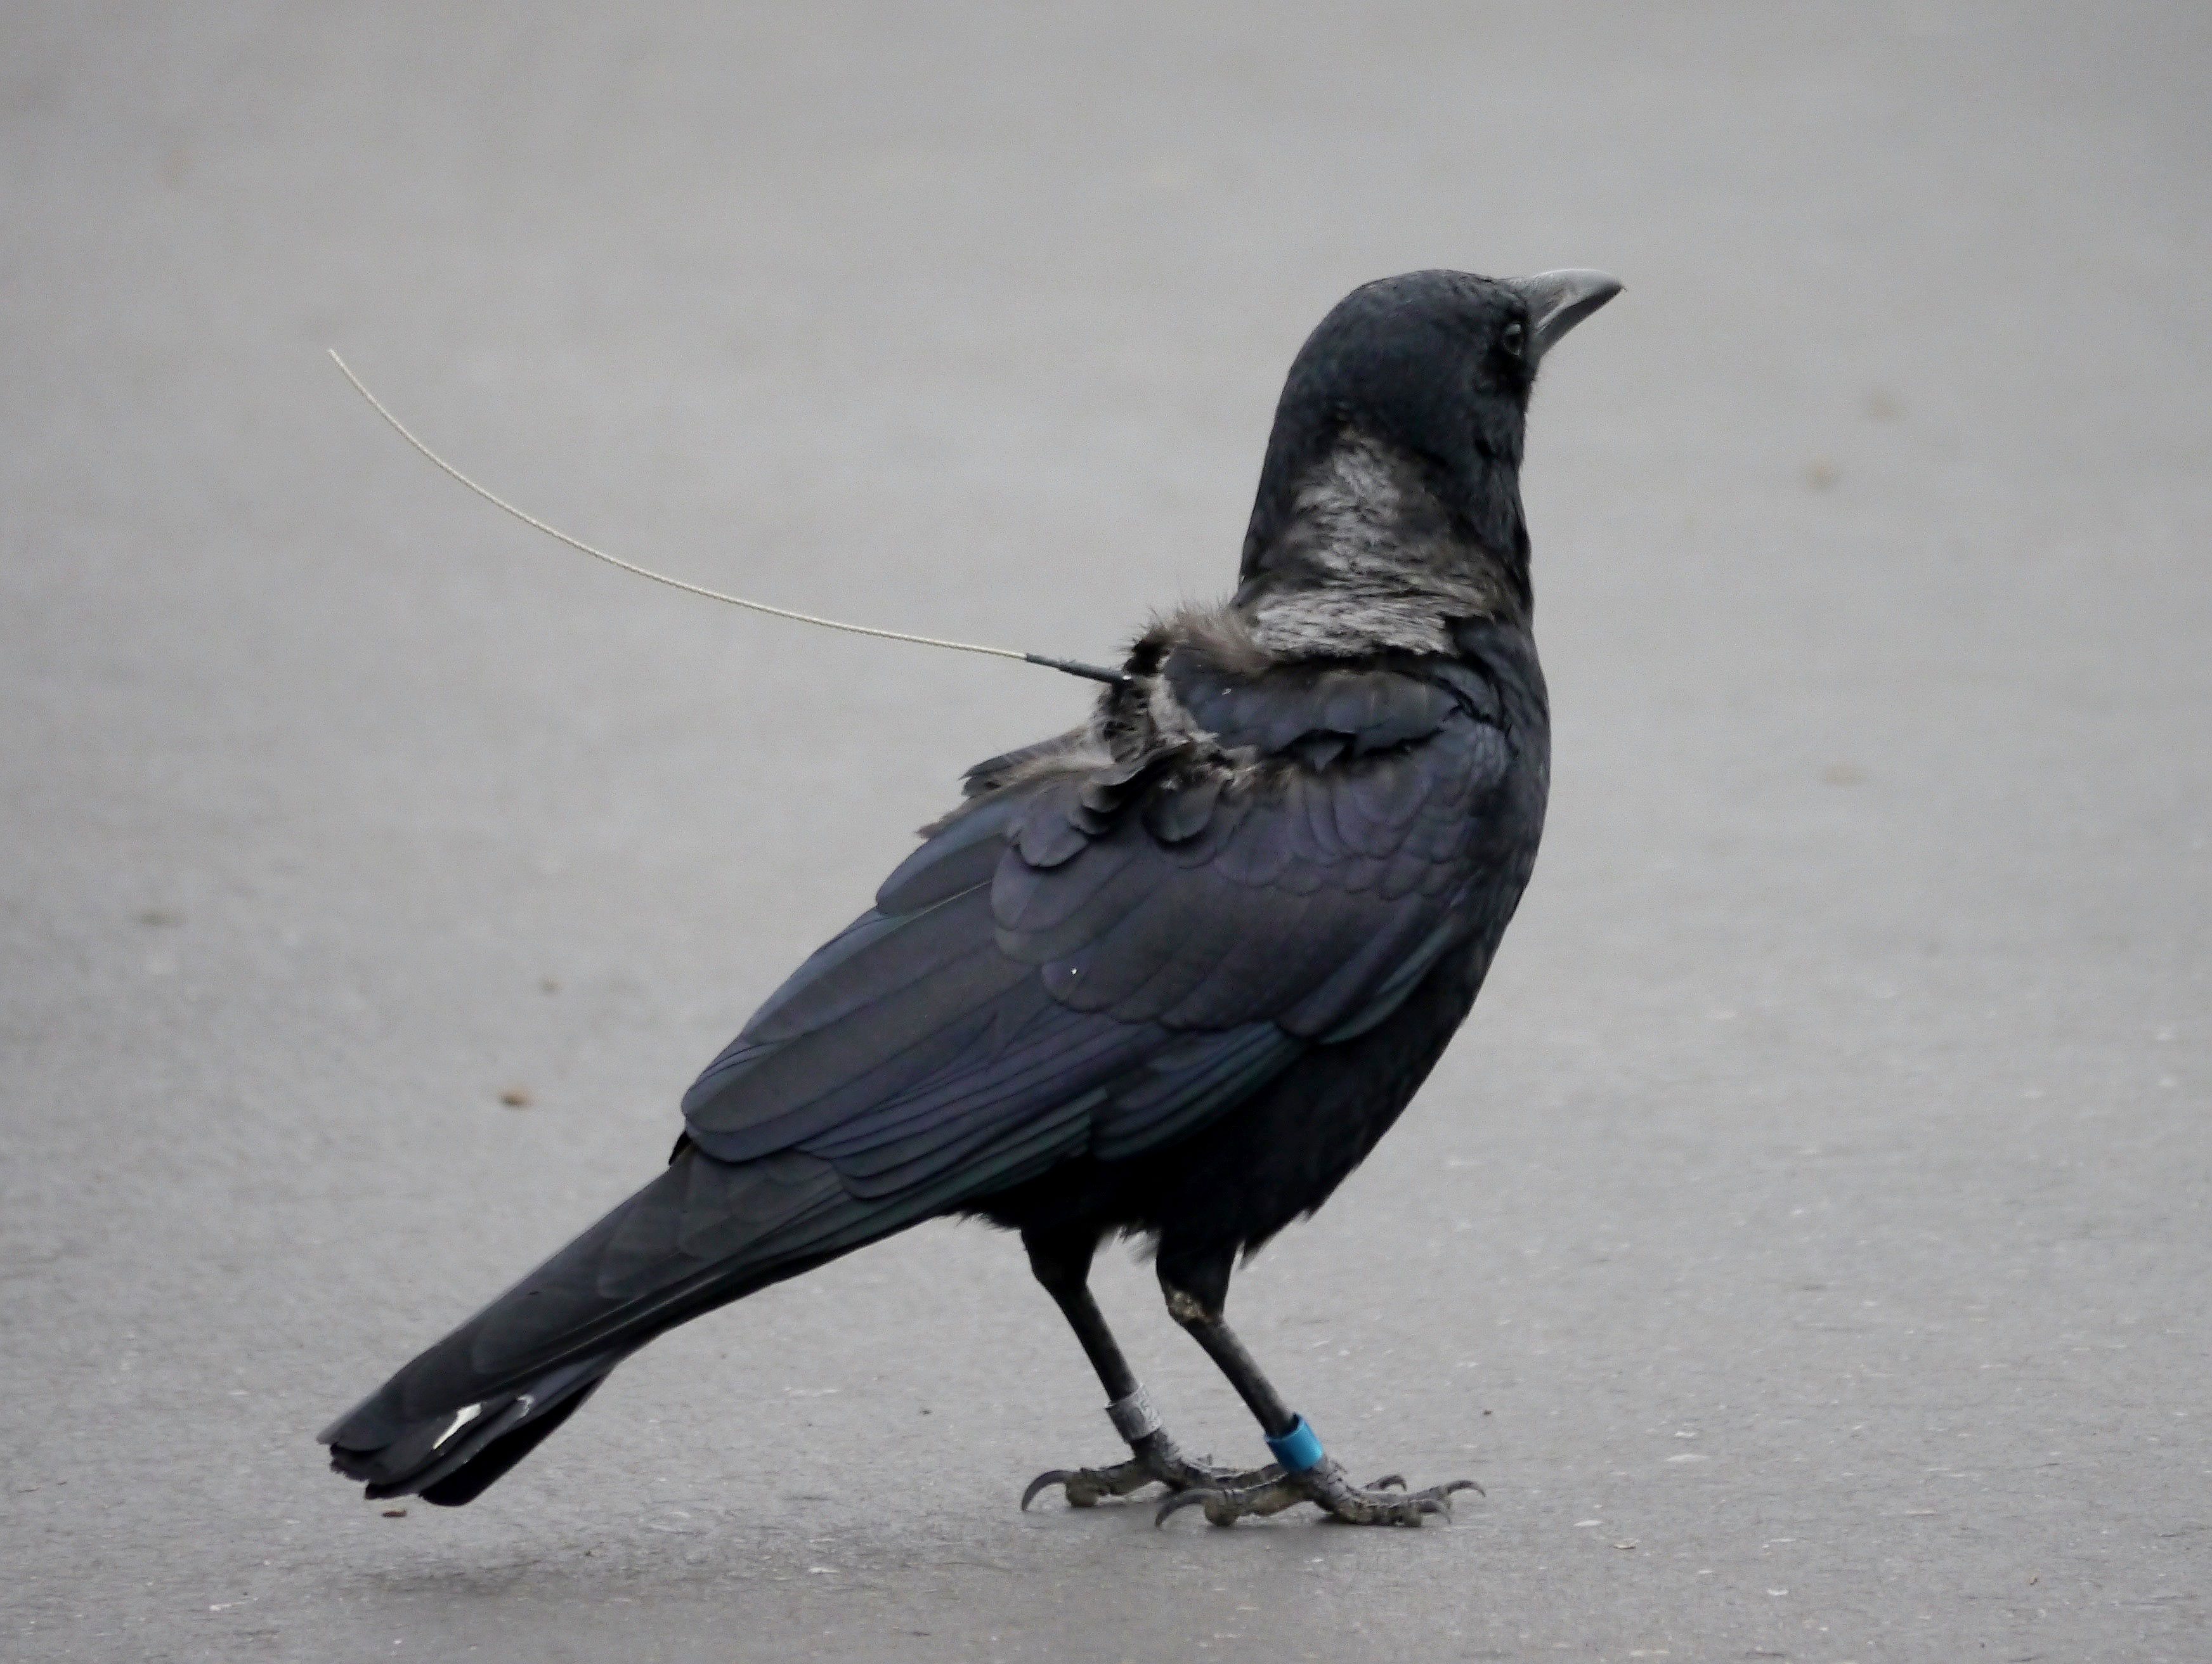 A crow with a satellite transmitter attached to its back. Photo by Melissa Jones.